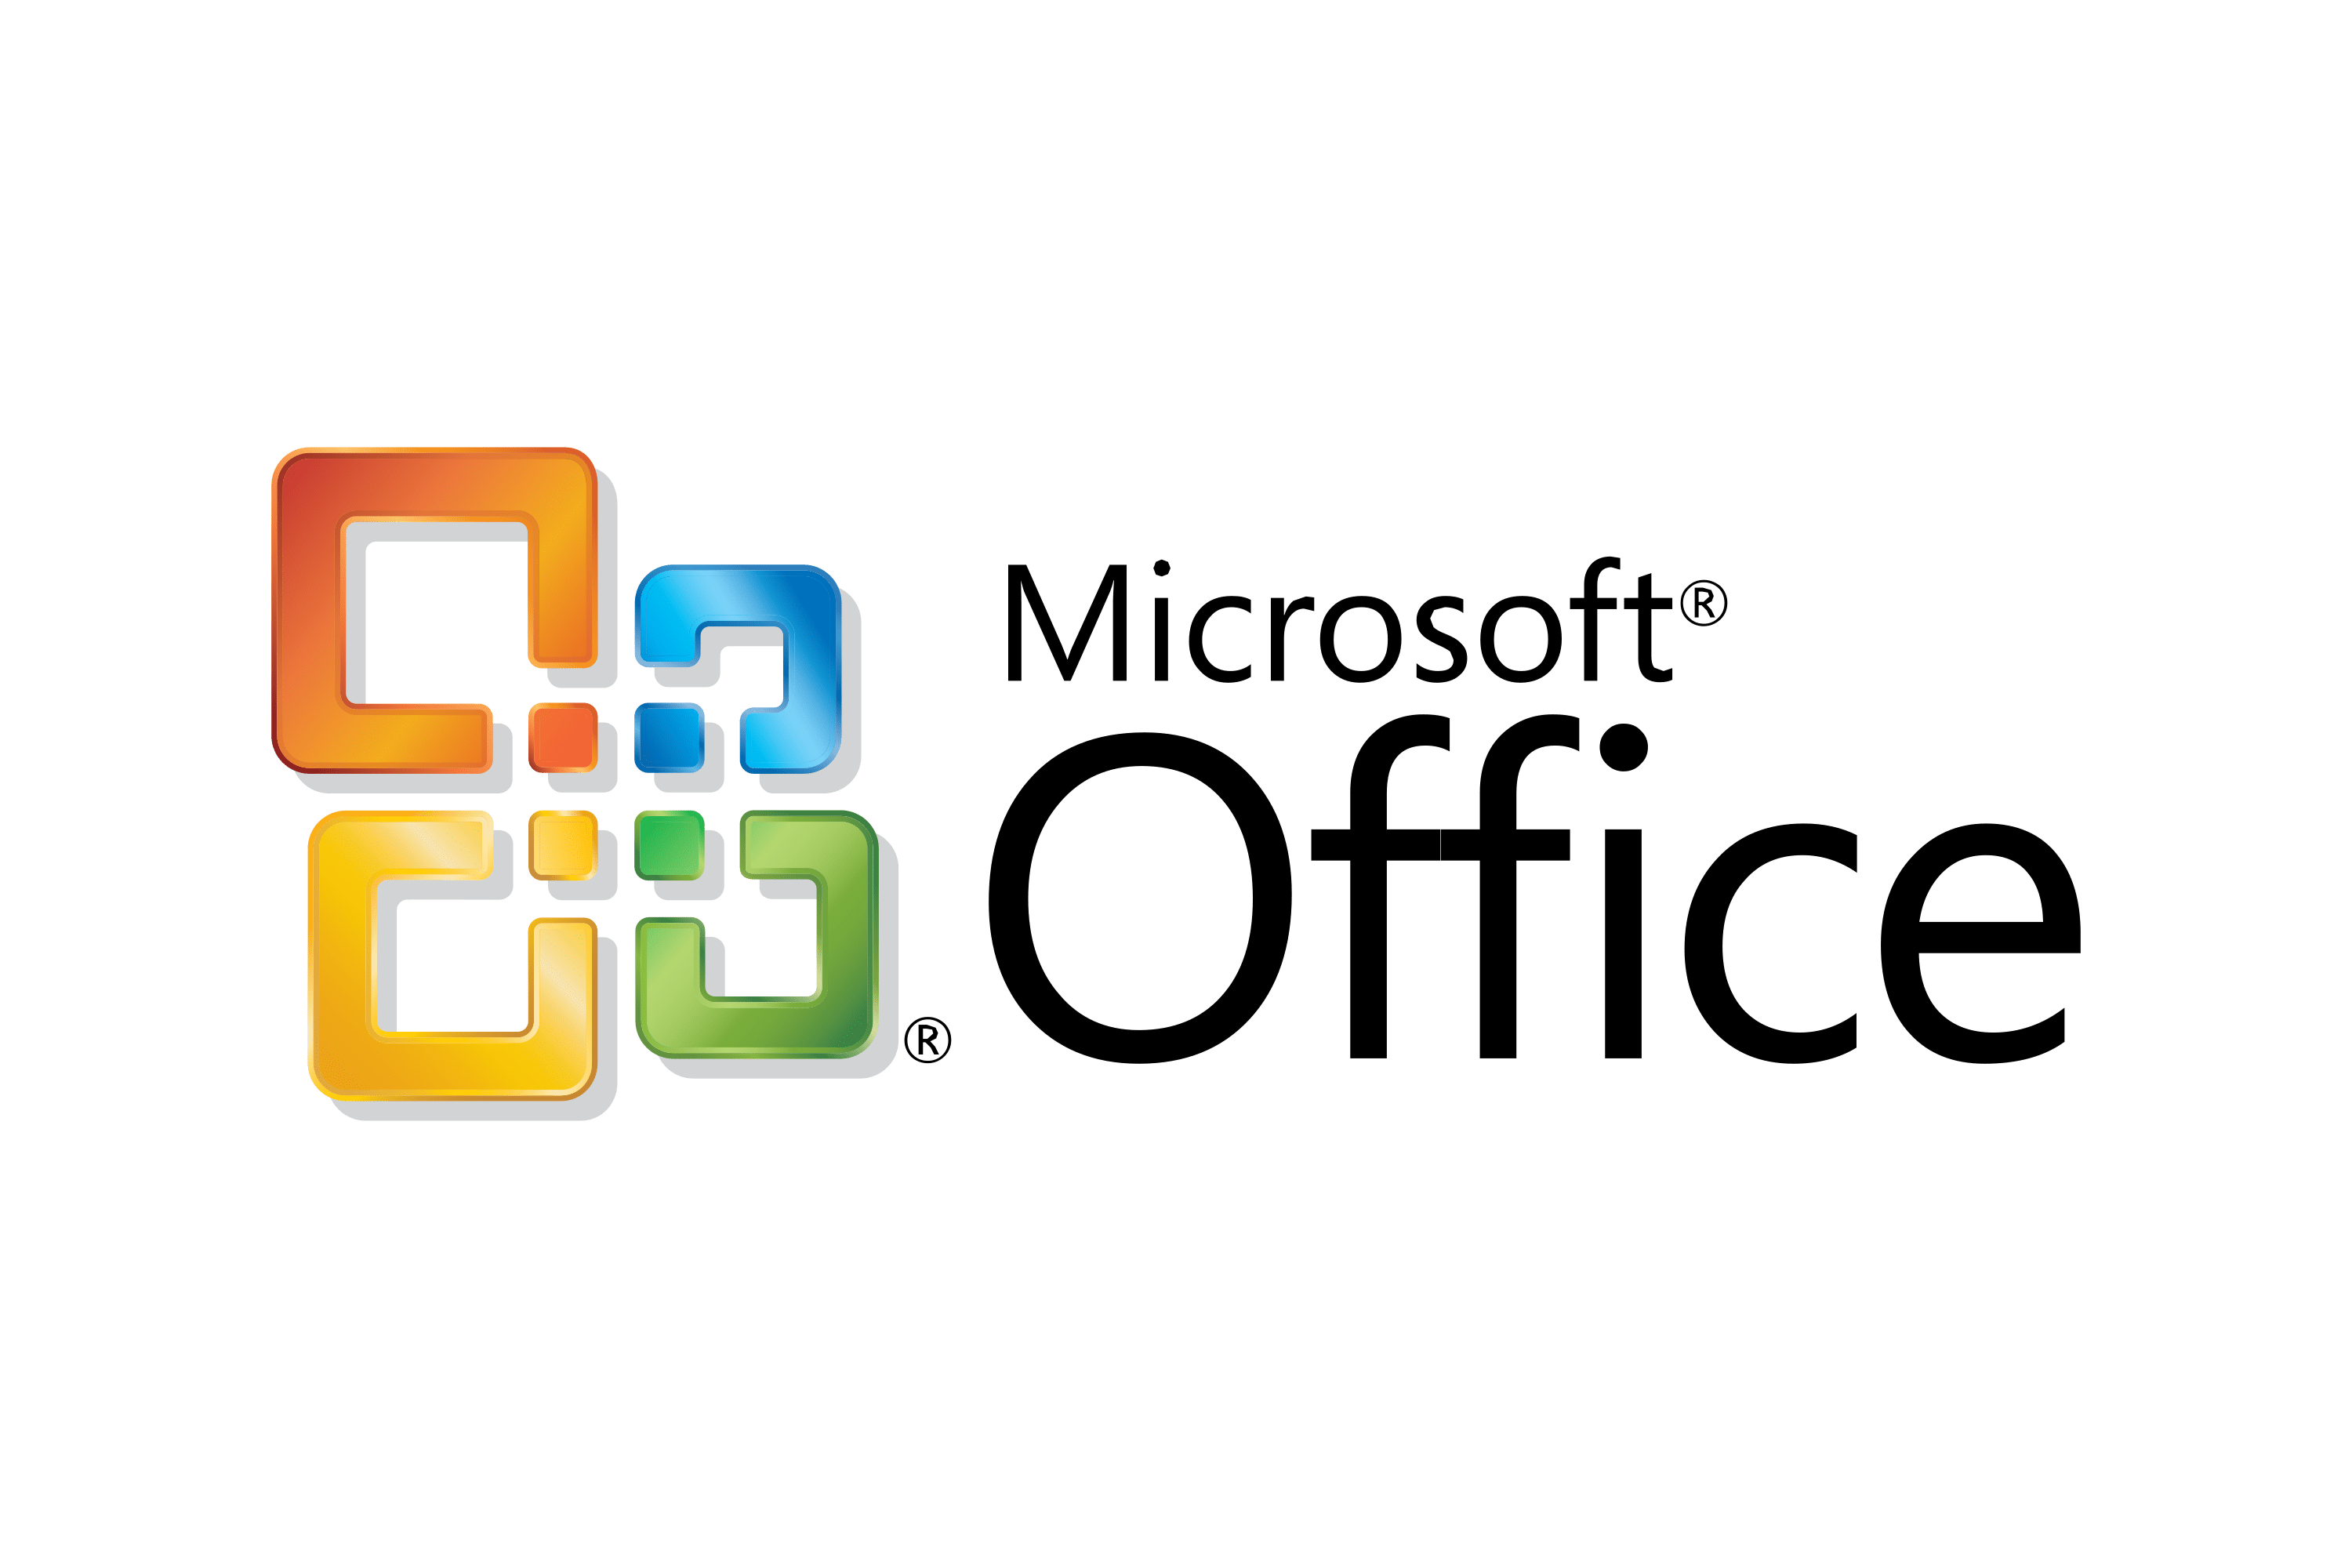 Microsoft Office 2007 Logo - Free download logo in SVG or PNG format